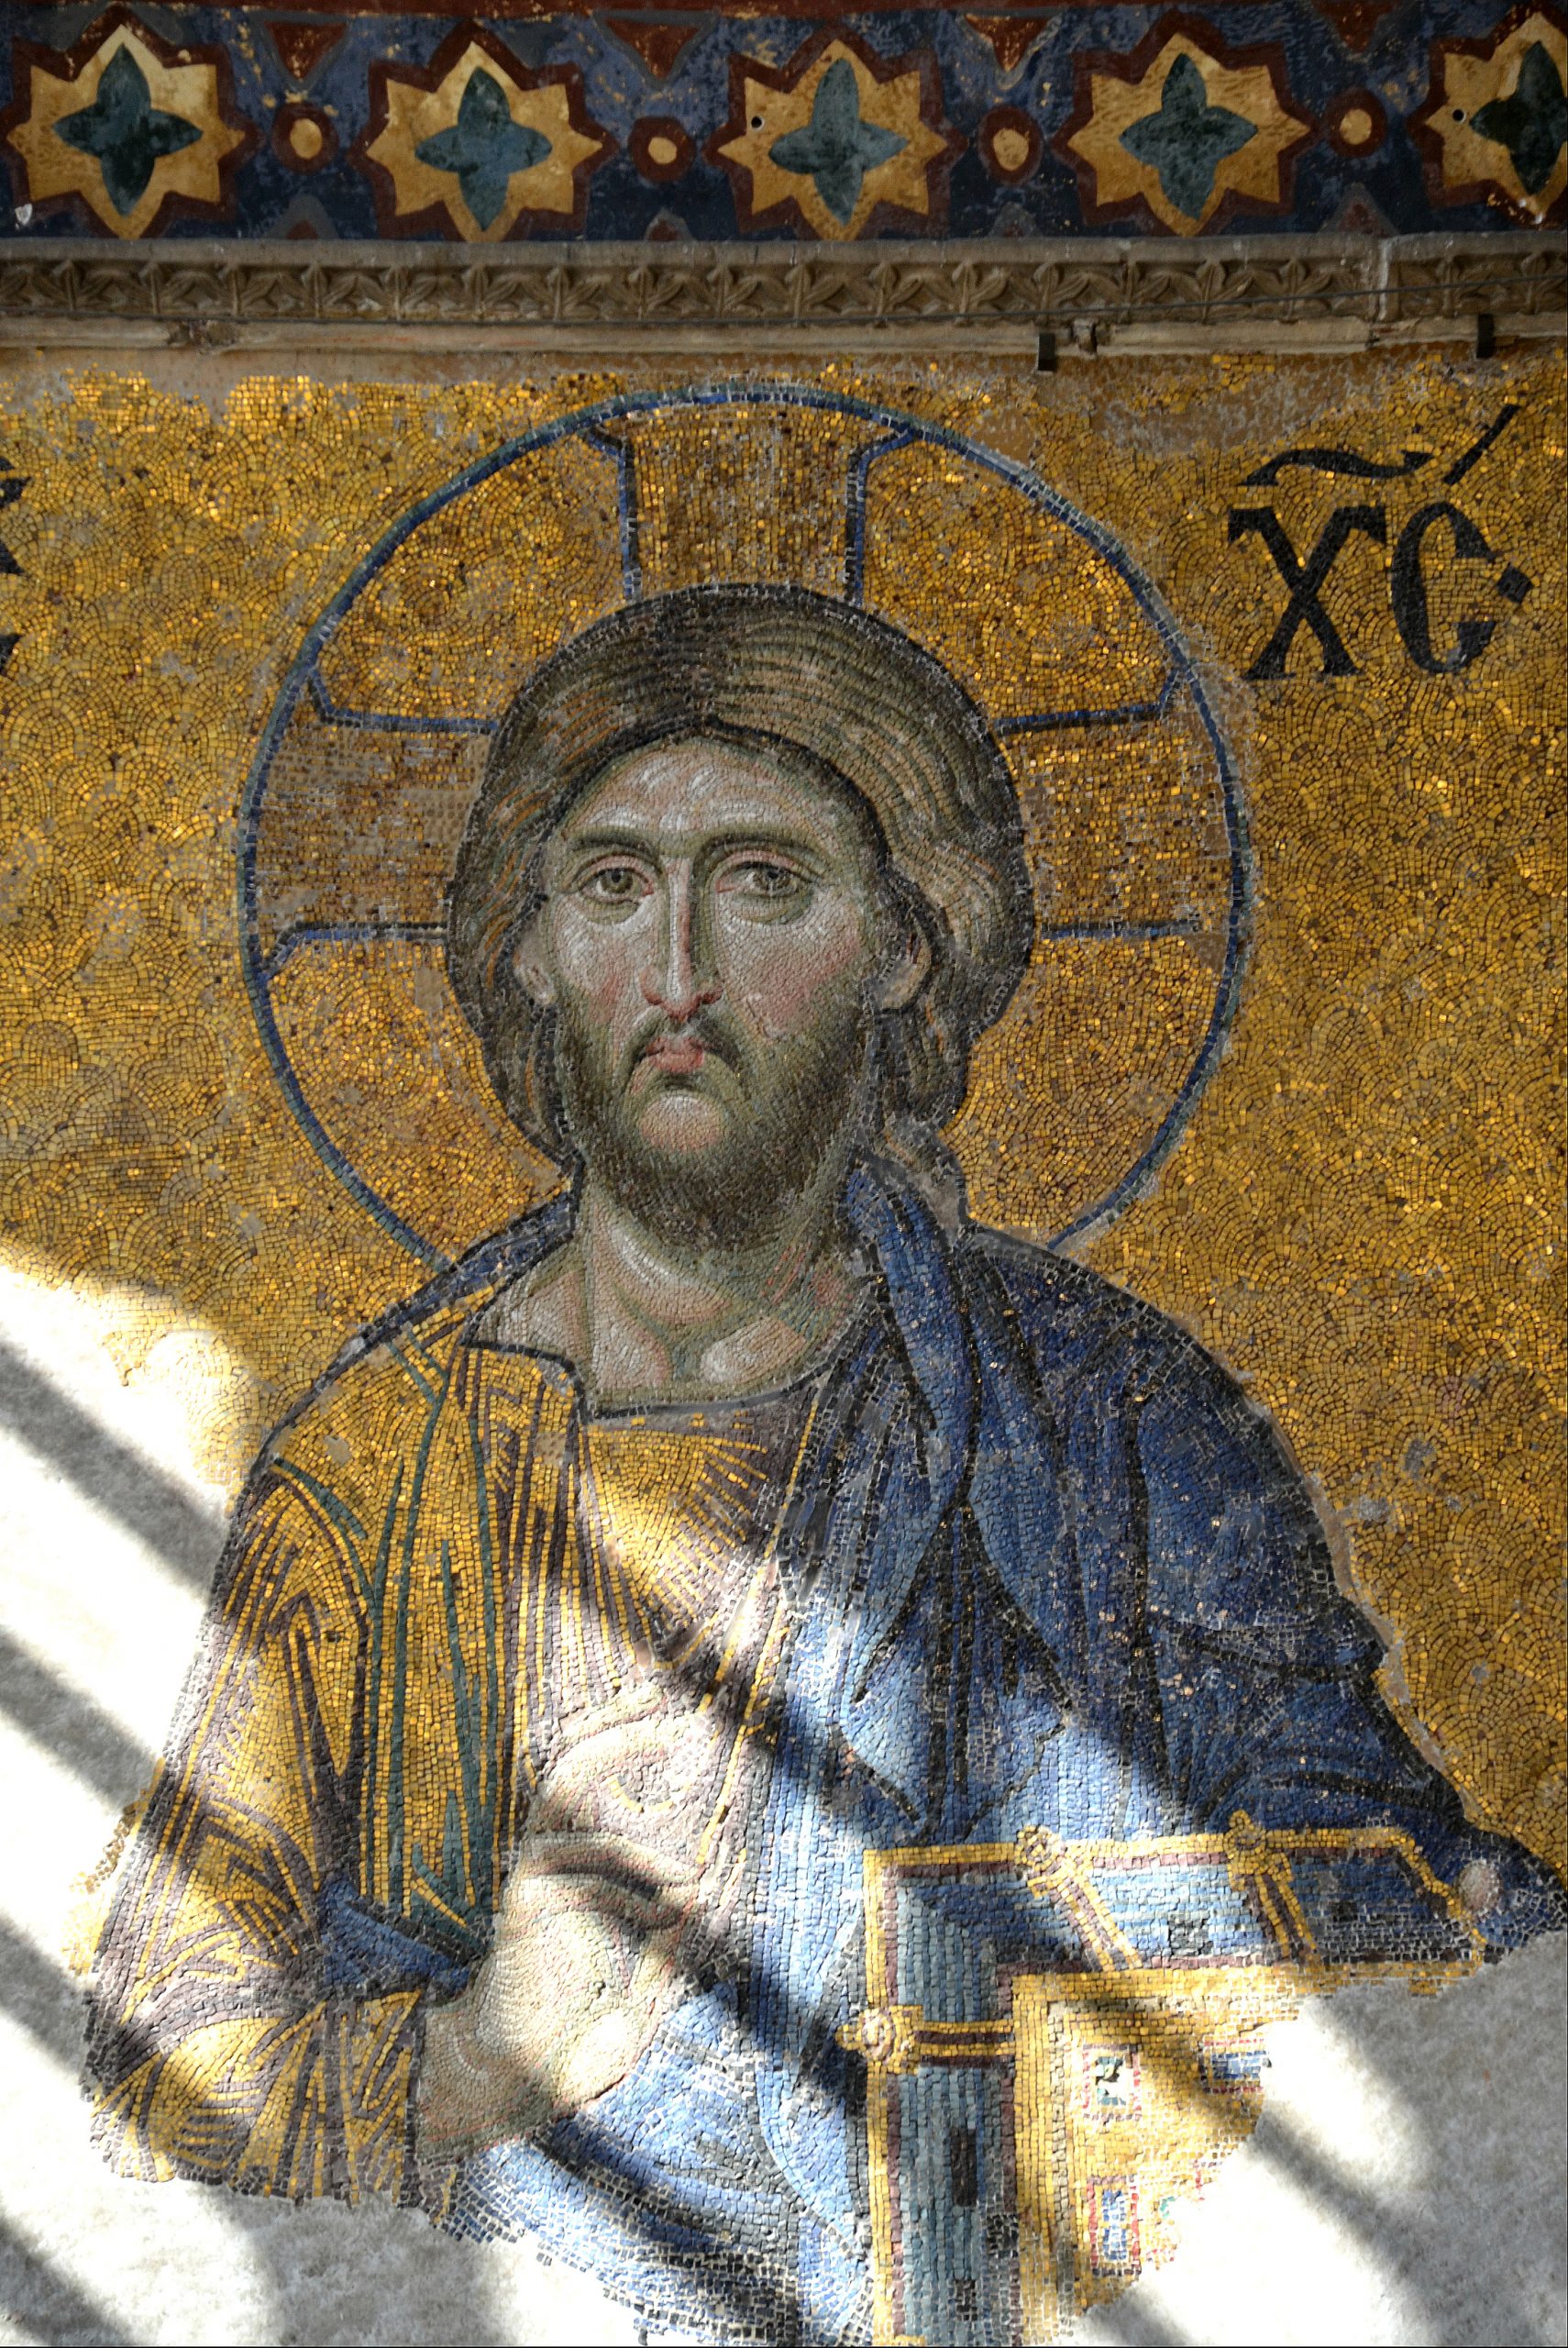 Jesus Christ Pantocrator detail of the Deesis Mosaic Christ with the Virgin Mary and John the Baptist 13th century AD Hagia Sophia Istanbul 37166690253 scaled